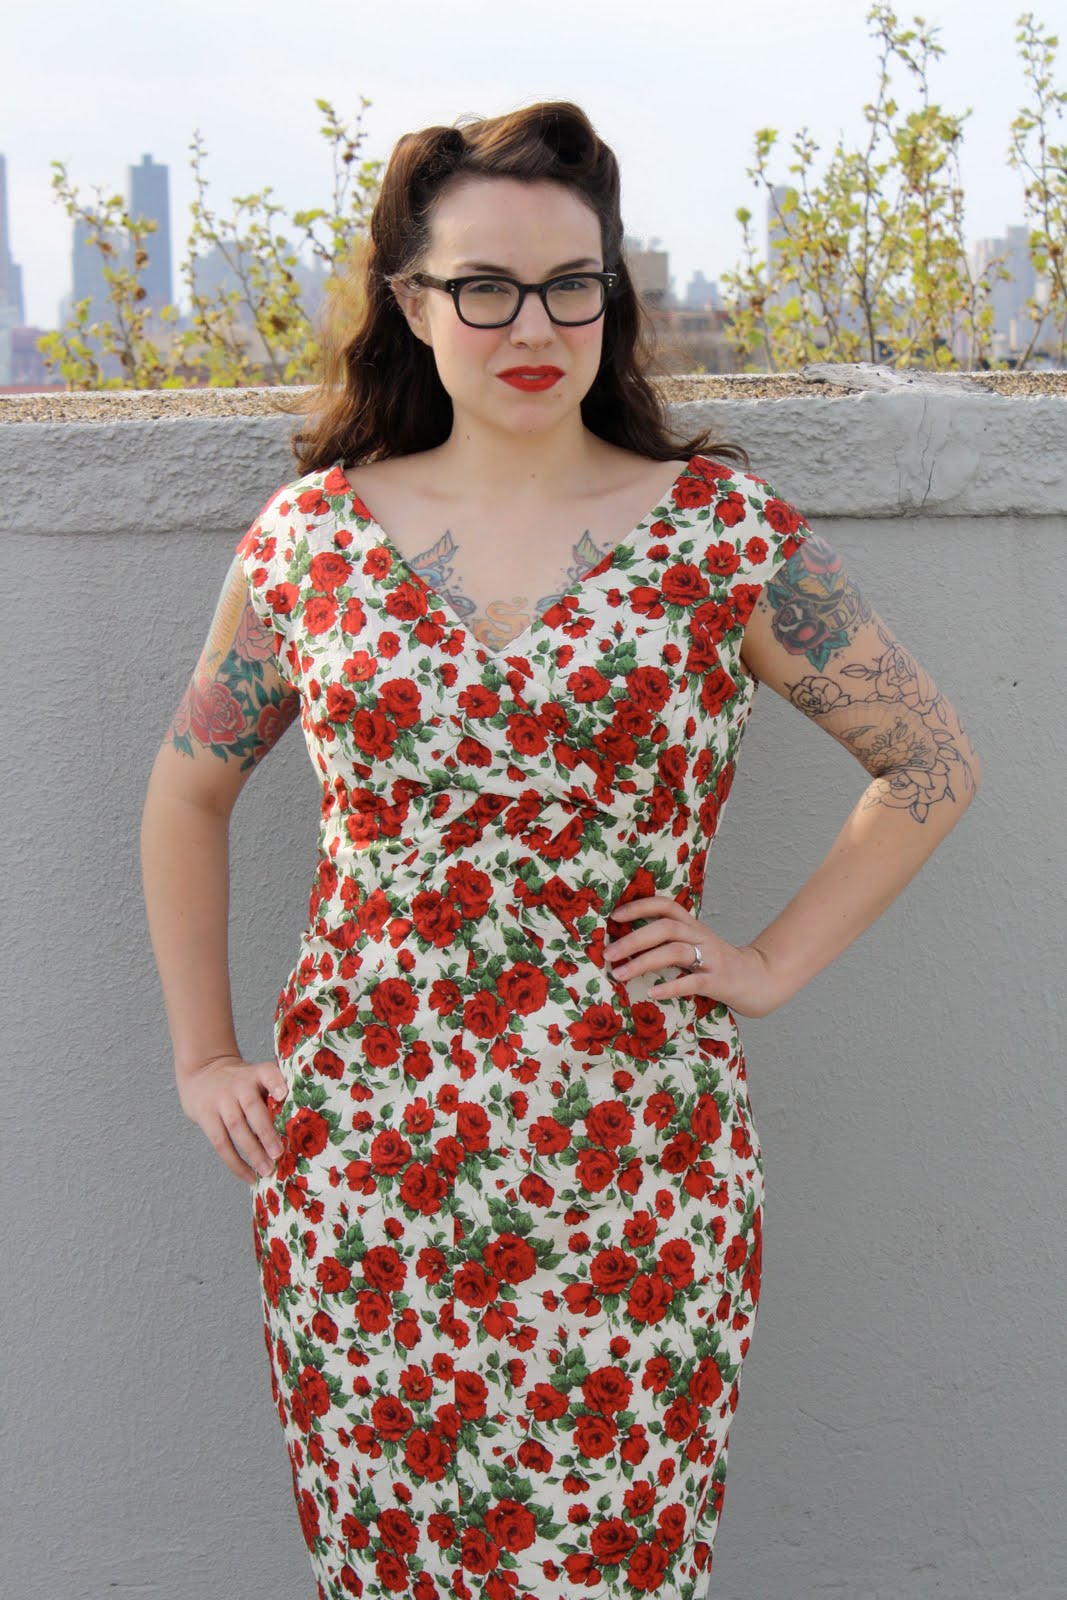 Gertie's New Blog for Better Sewing: Roses Are Red: The Ceil Chapman ...